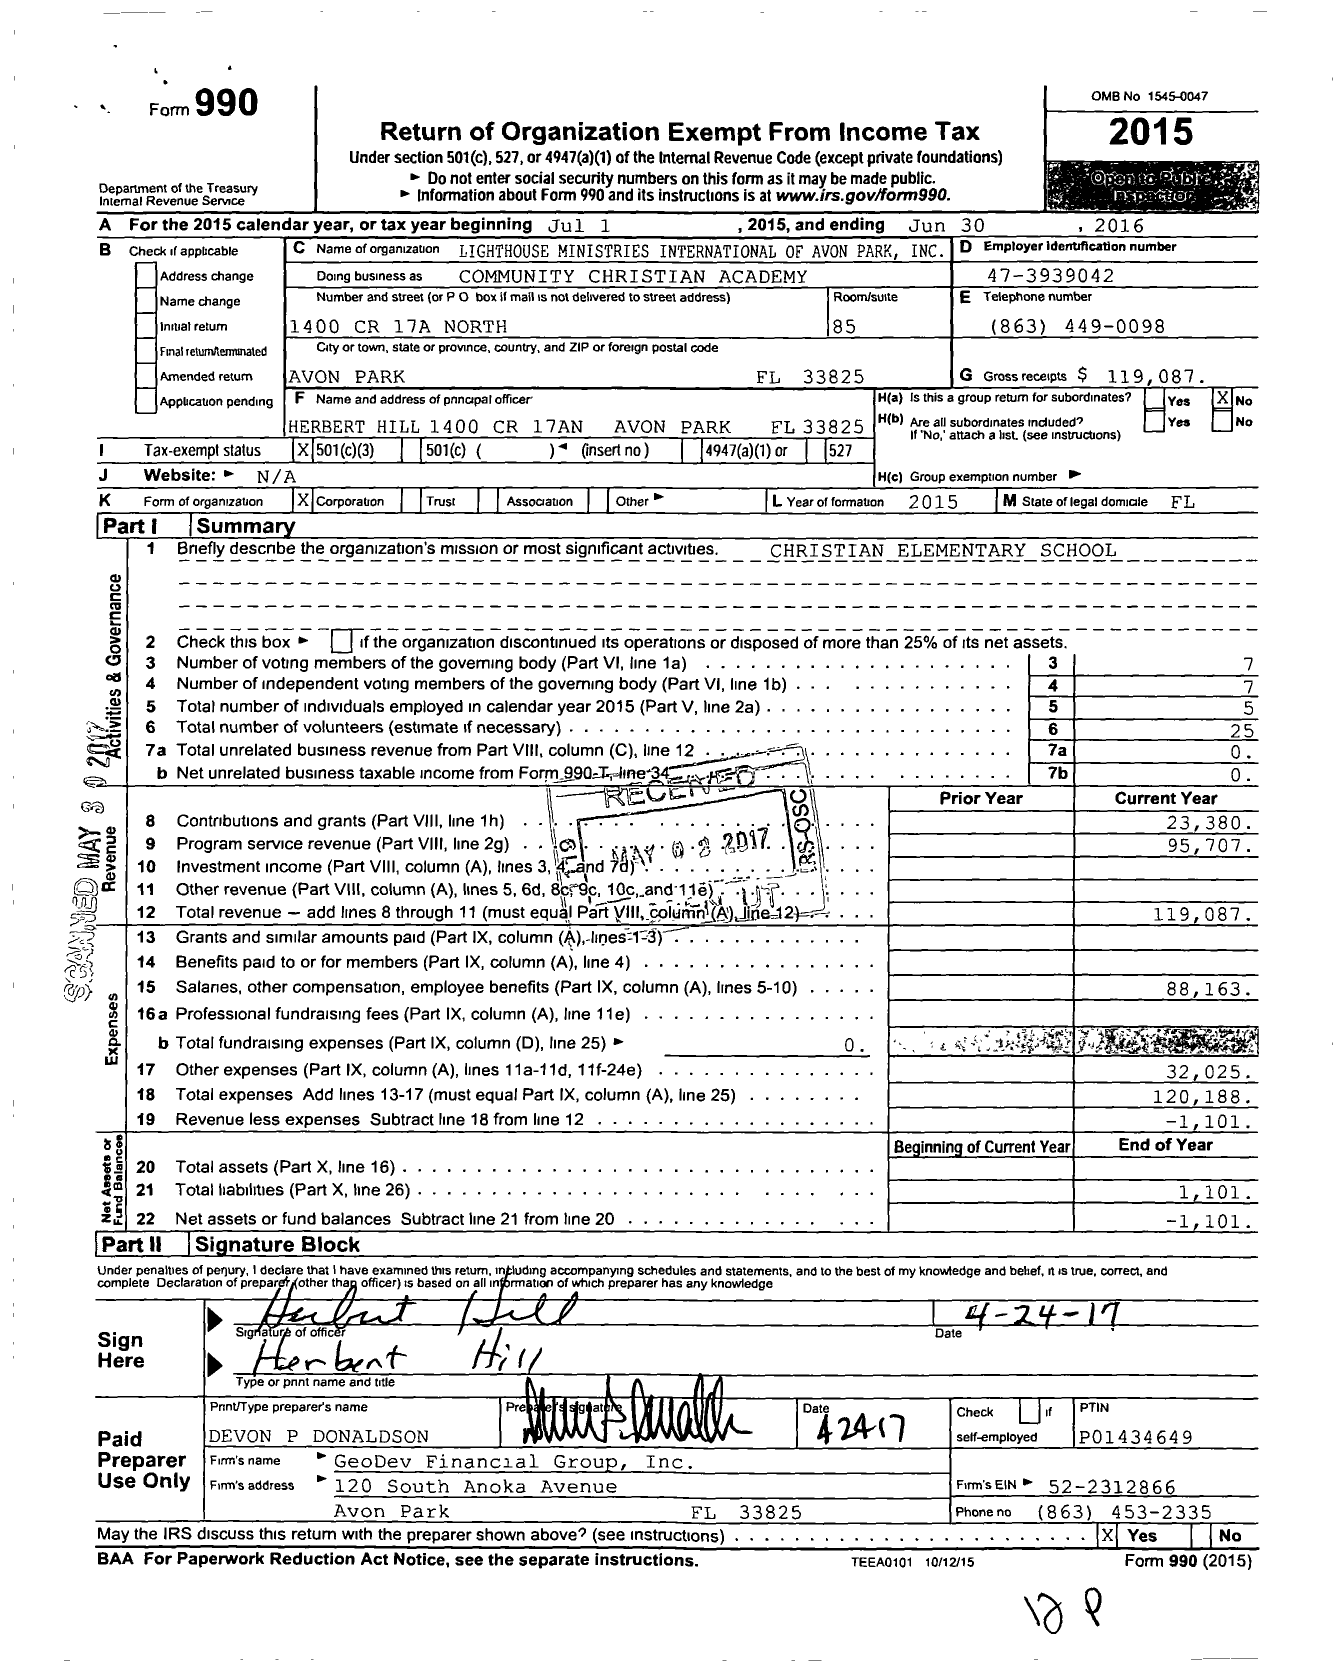 Image of first page of 2015 Form 990 for Lighthouse Ministries International of Avon Park